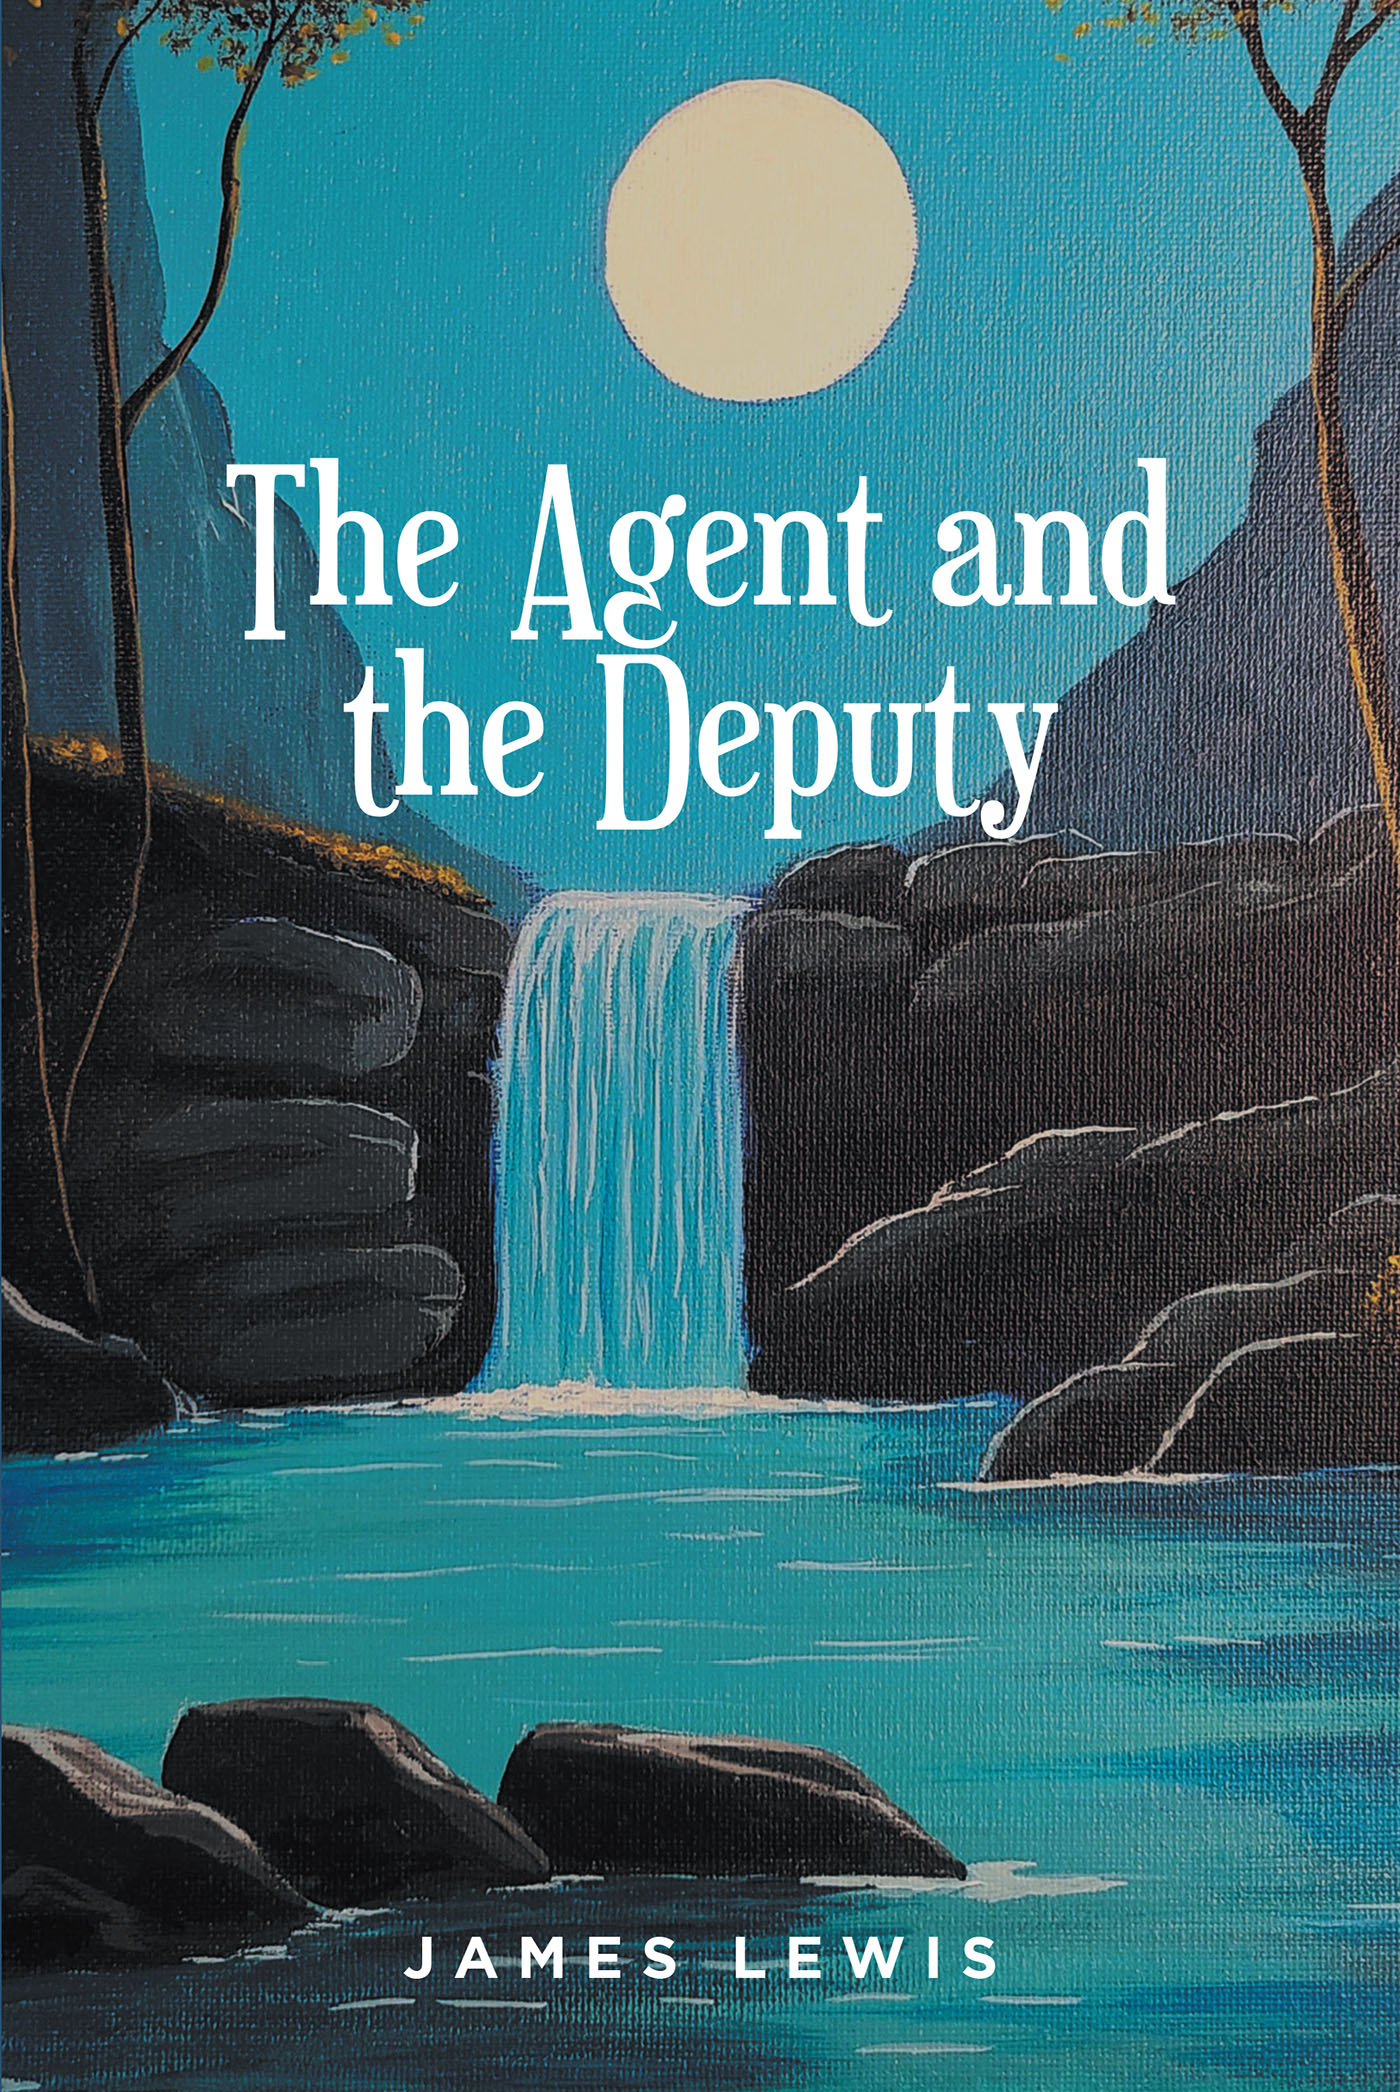 James Lewis’s New Book, "The Agent and the Deputy," is a Riveting Crime Novel Revolving Around the Investigation of Multiple Murders in the Old West That Might be Linked